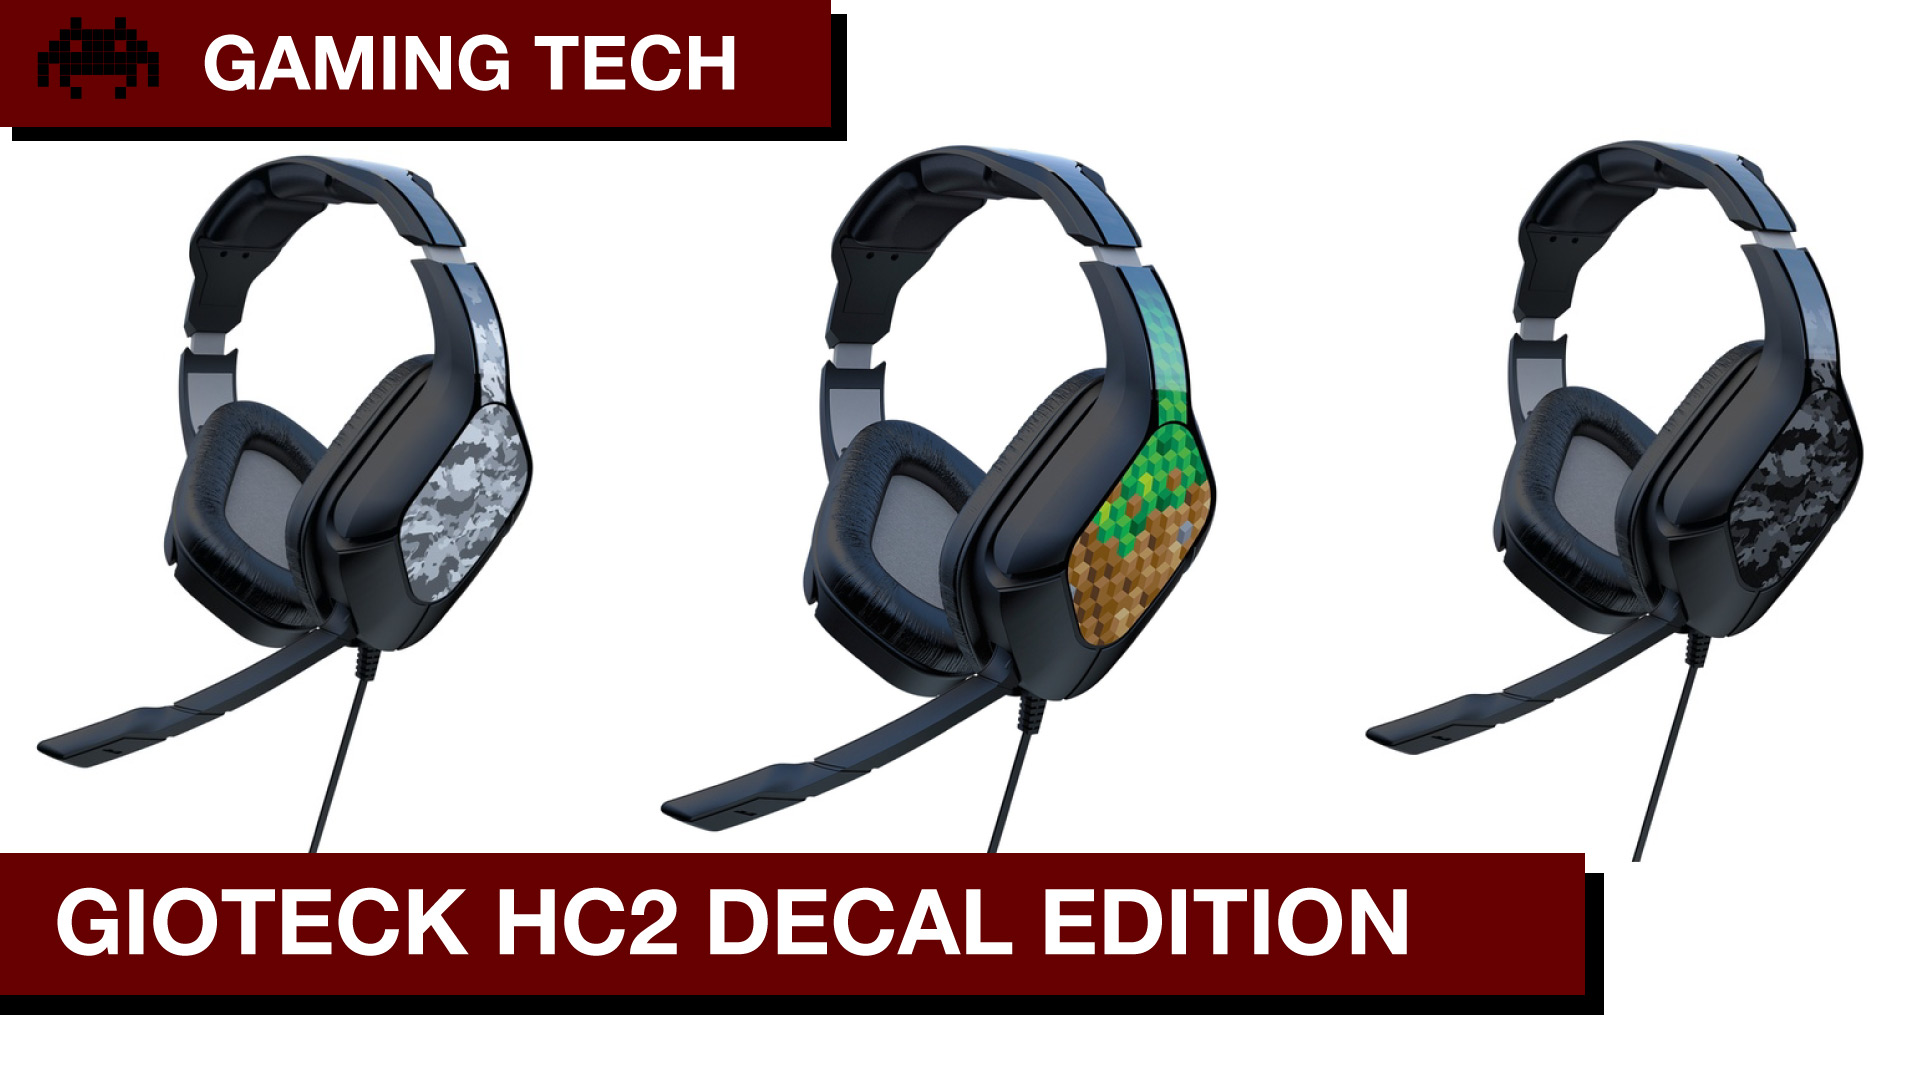 GIOTECK-HC2 Decal Edition